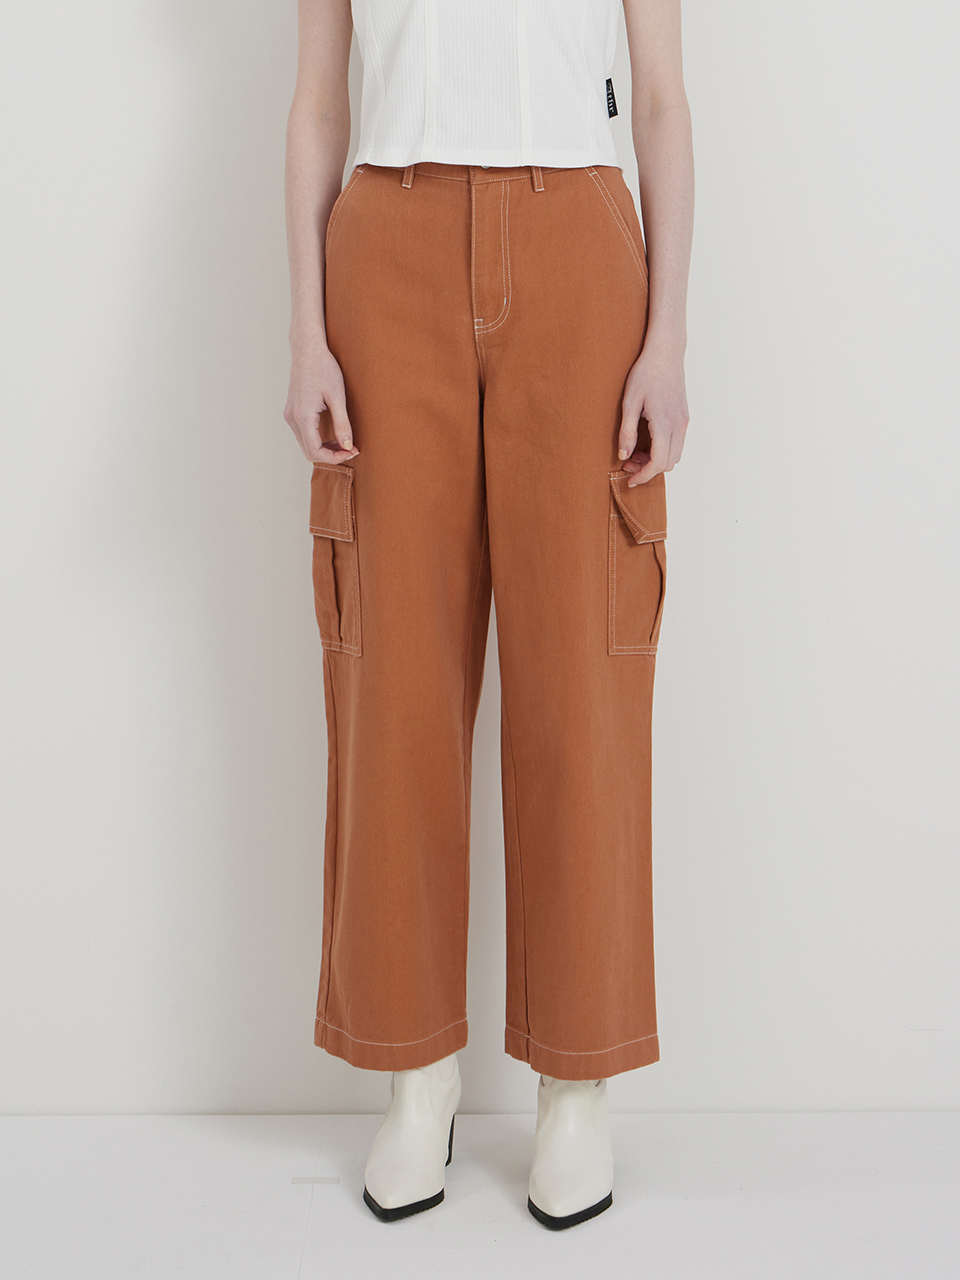 Camel colored cargo pants